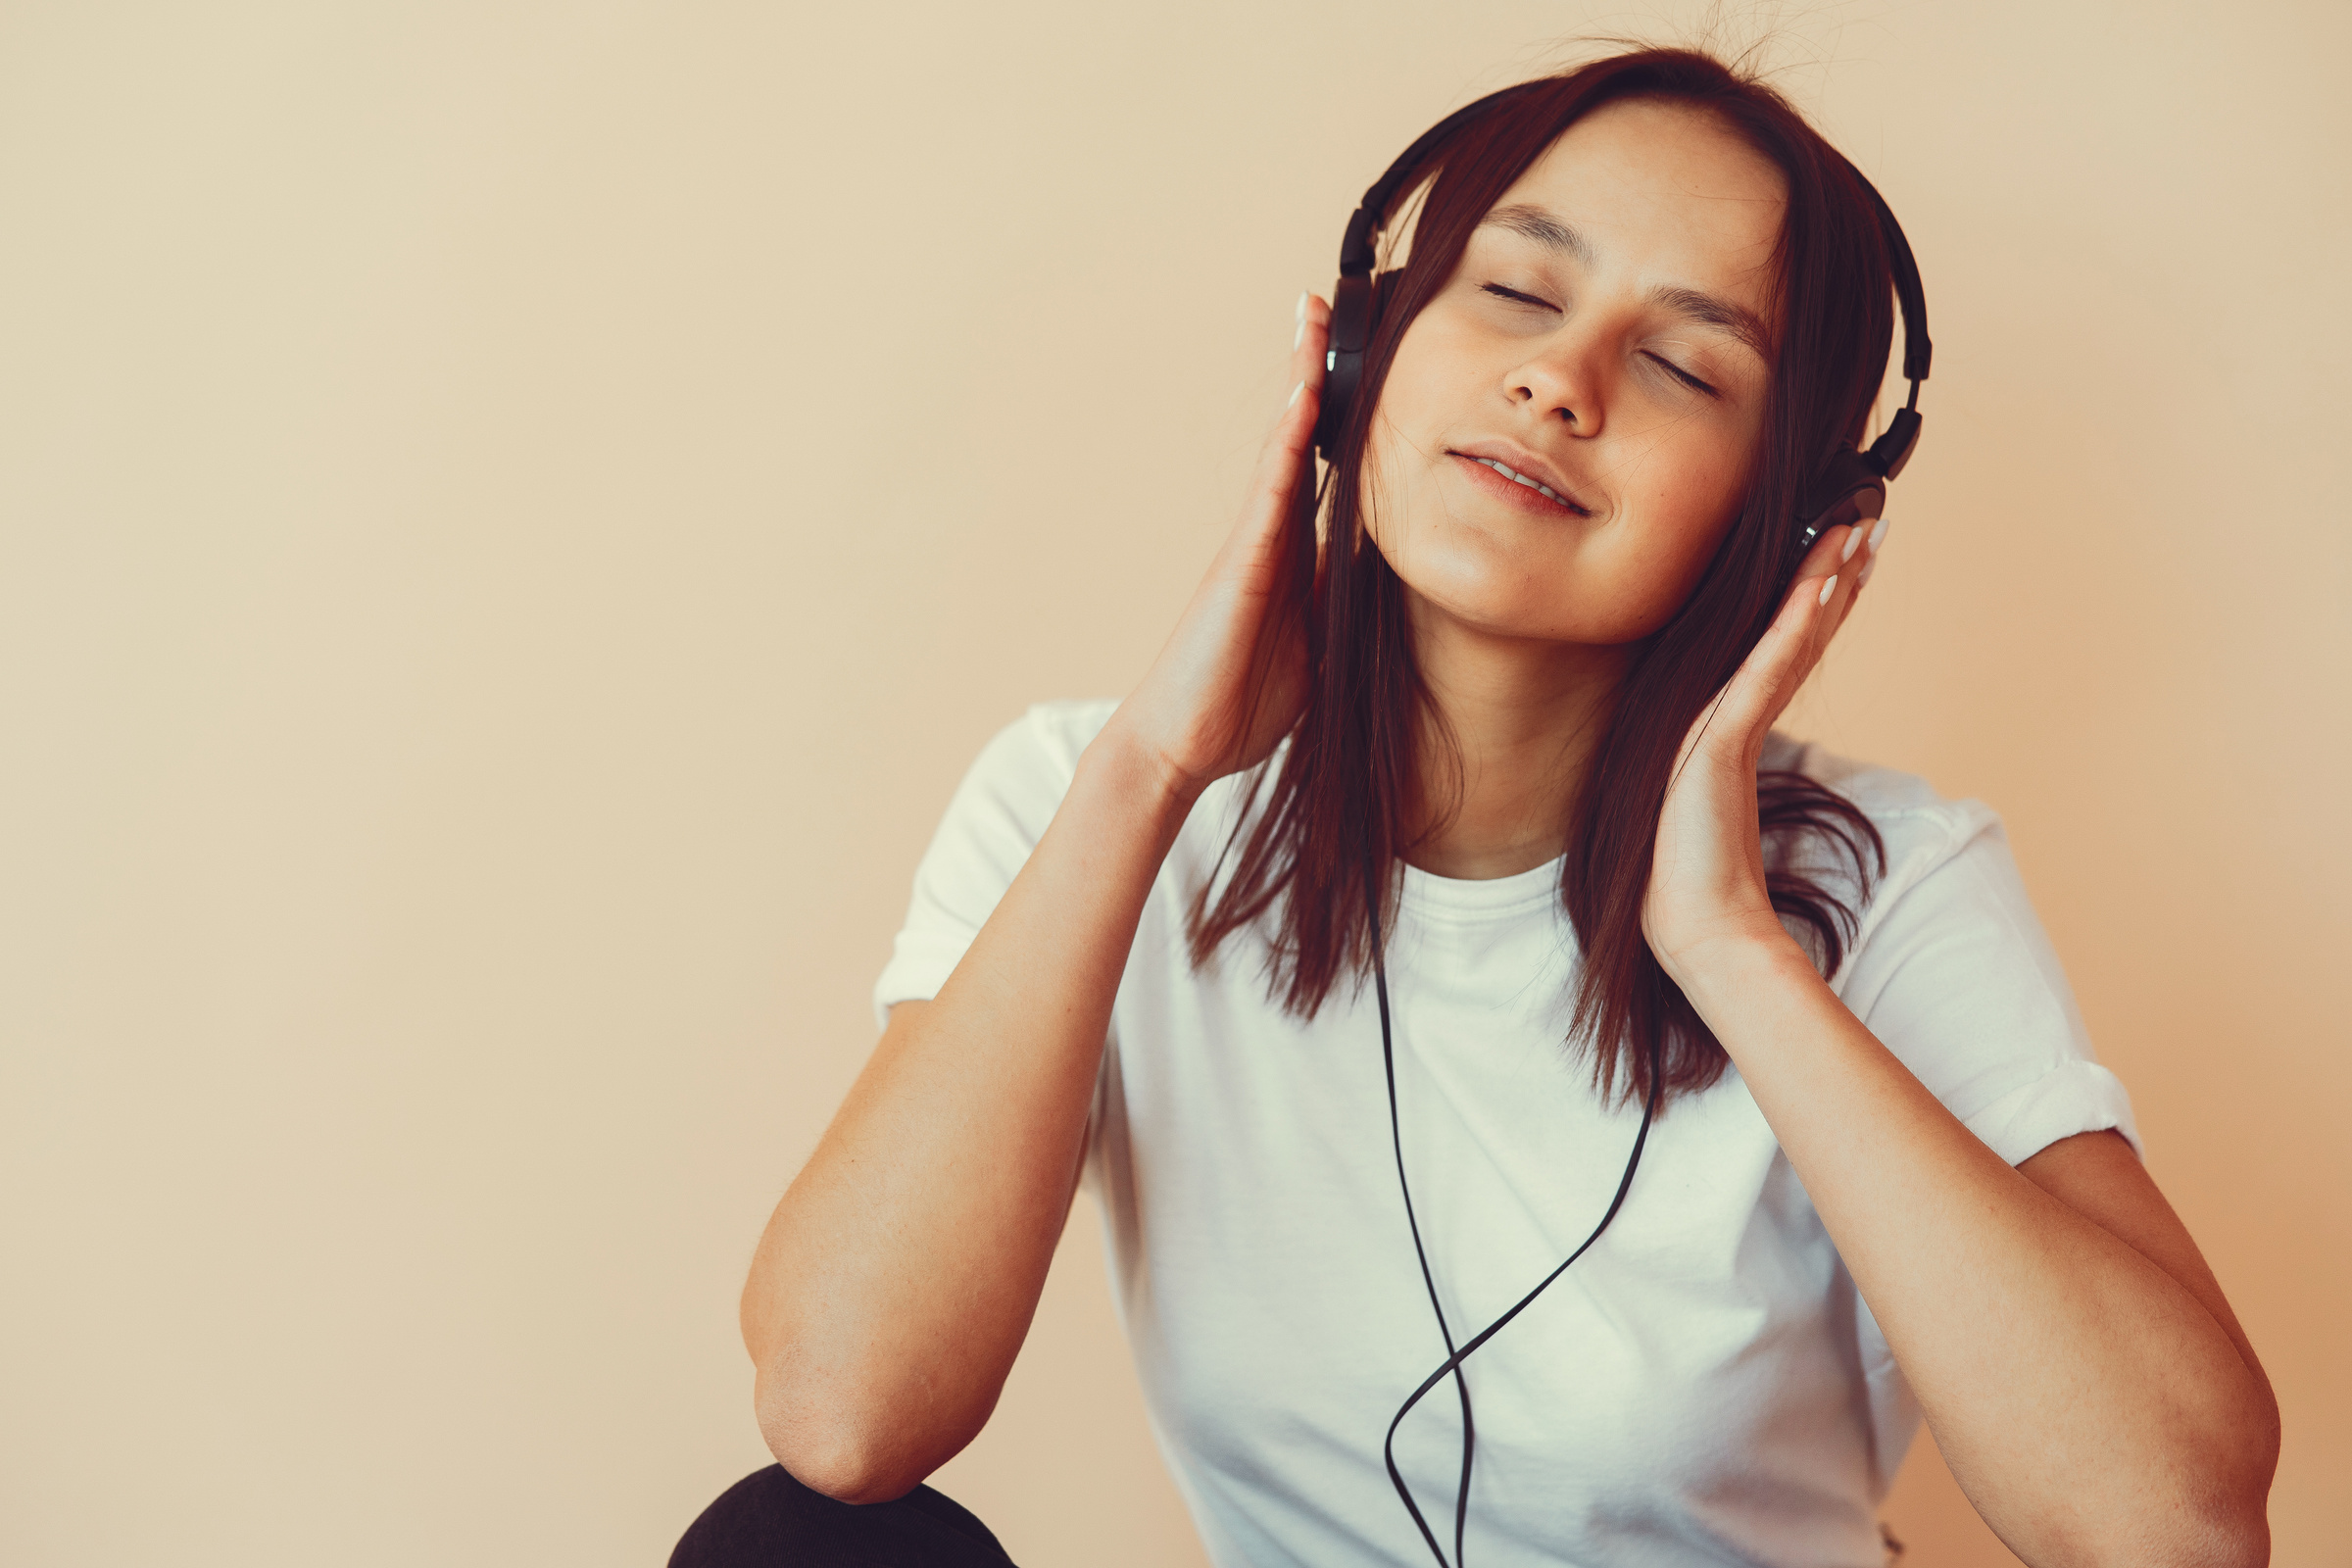 Dreamy young woman listening to music in headphones